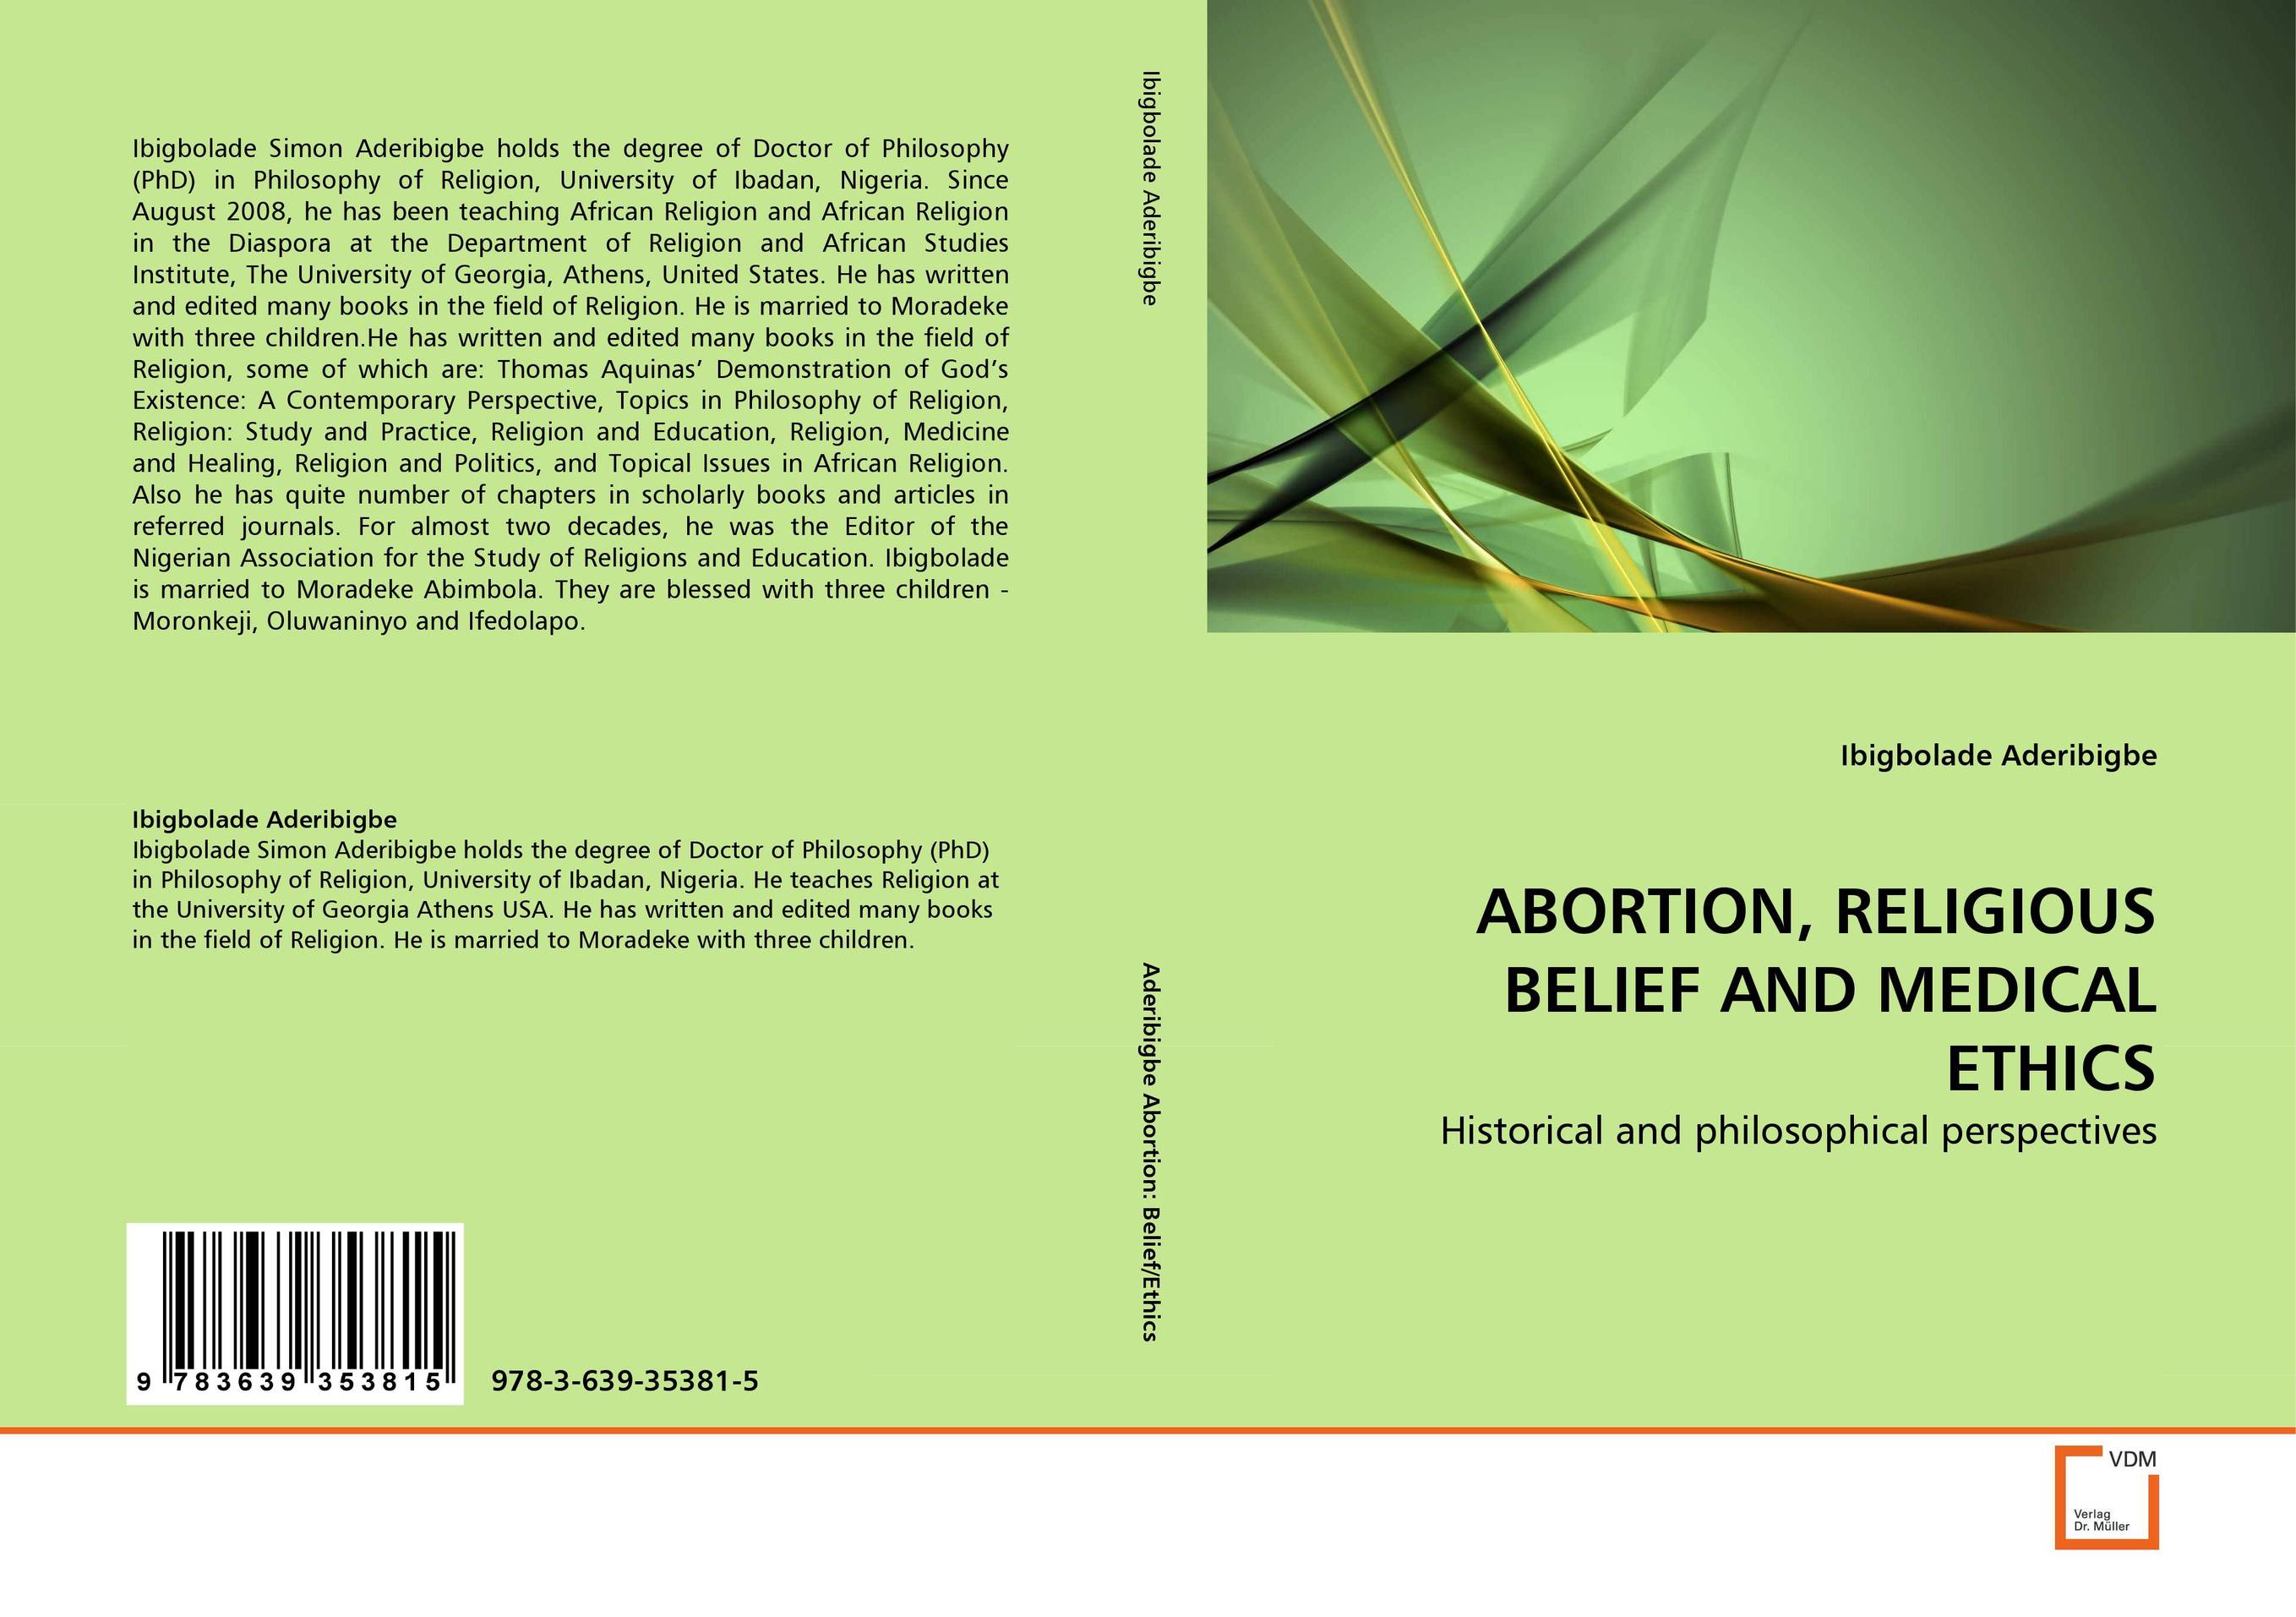 ABORTION, RELIGIOUS BELIEF AND MEDICAL ETHICS